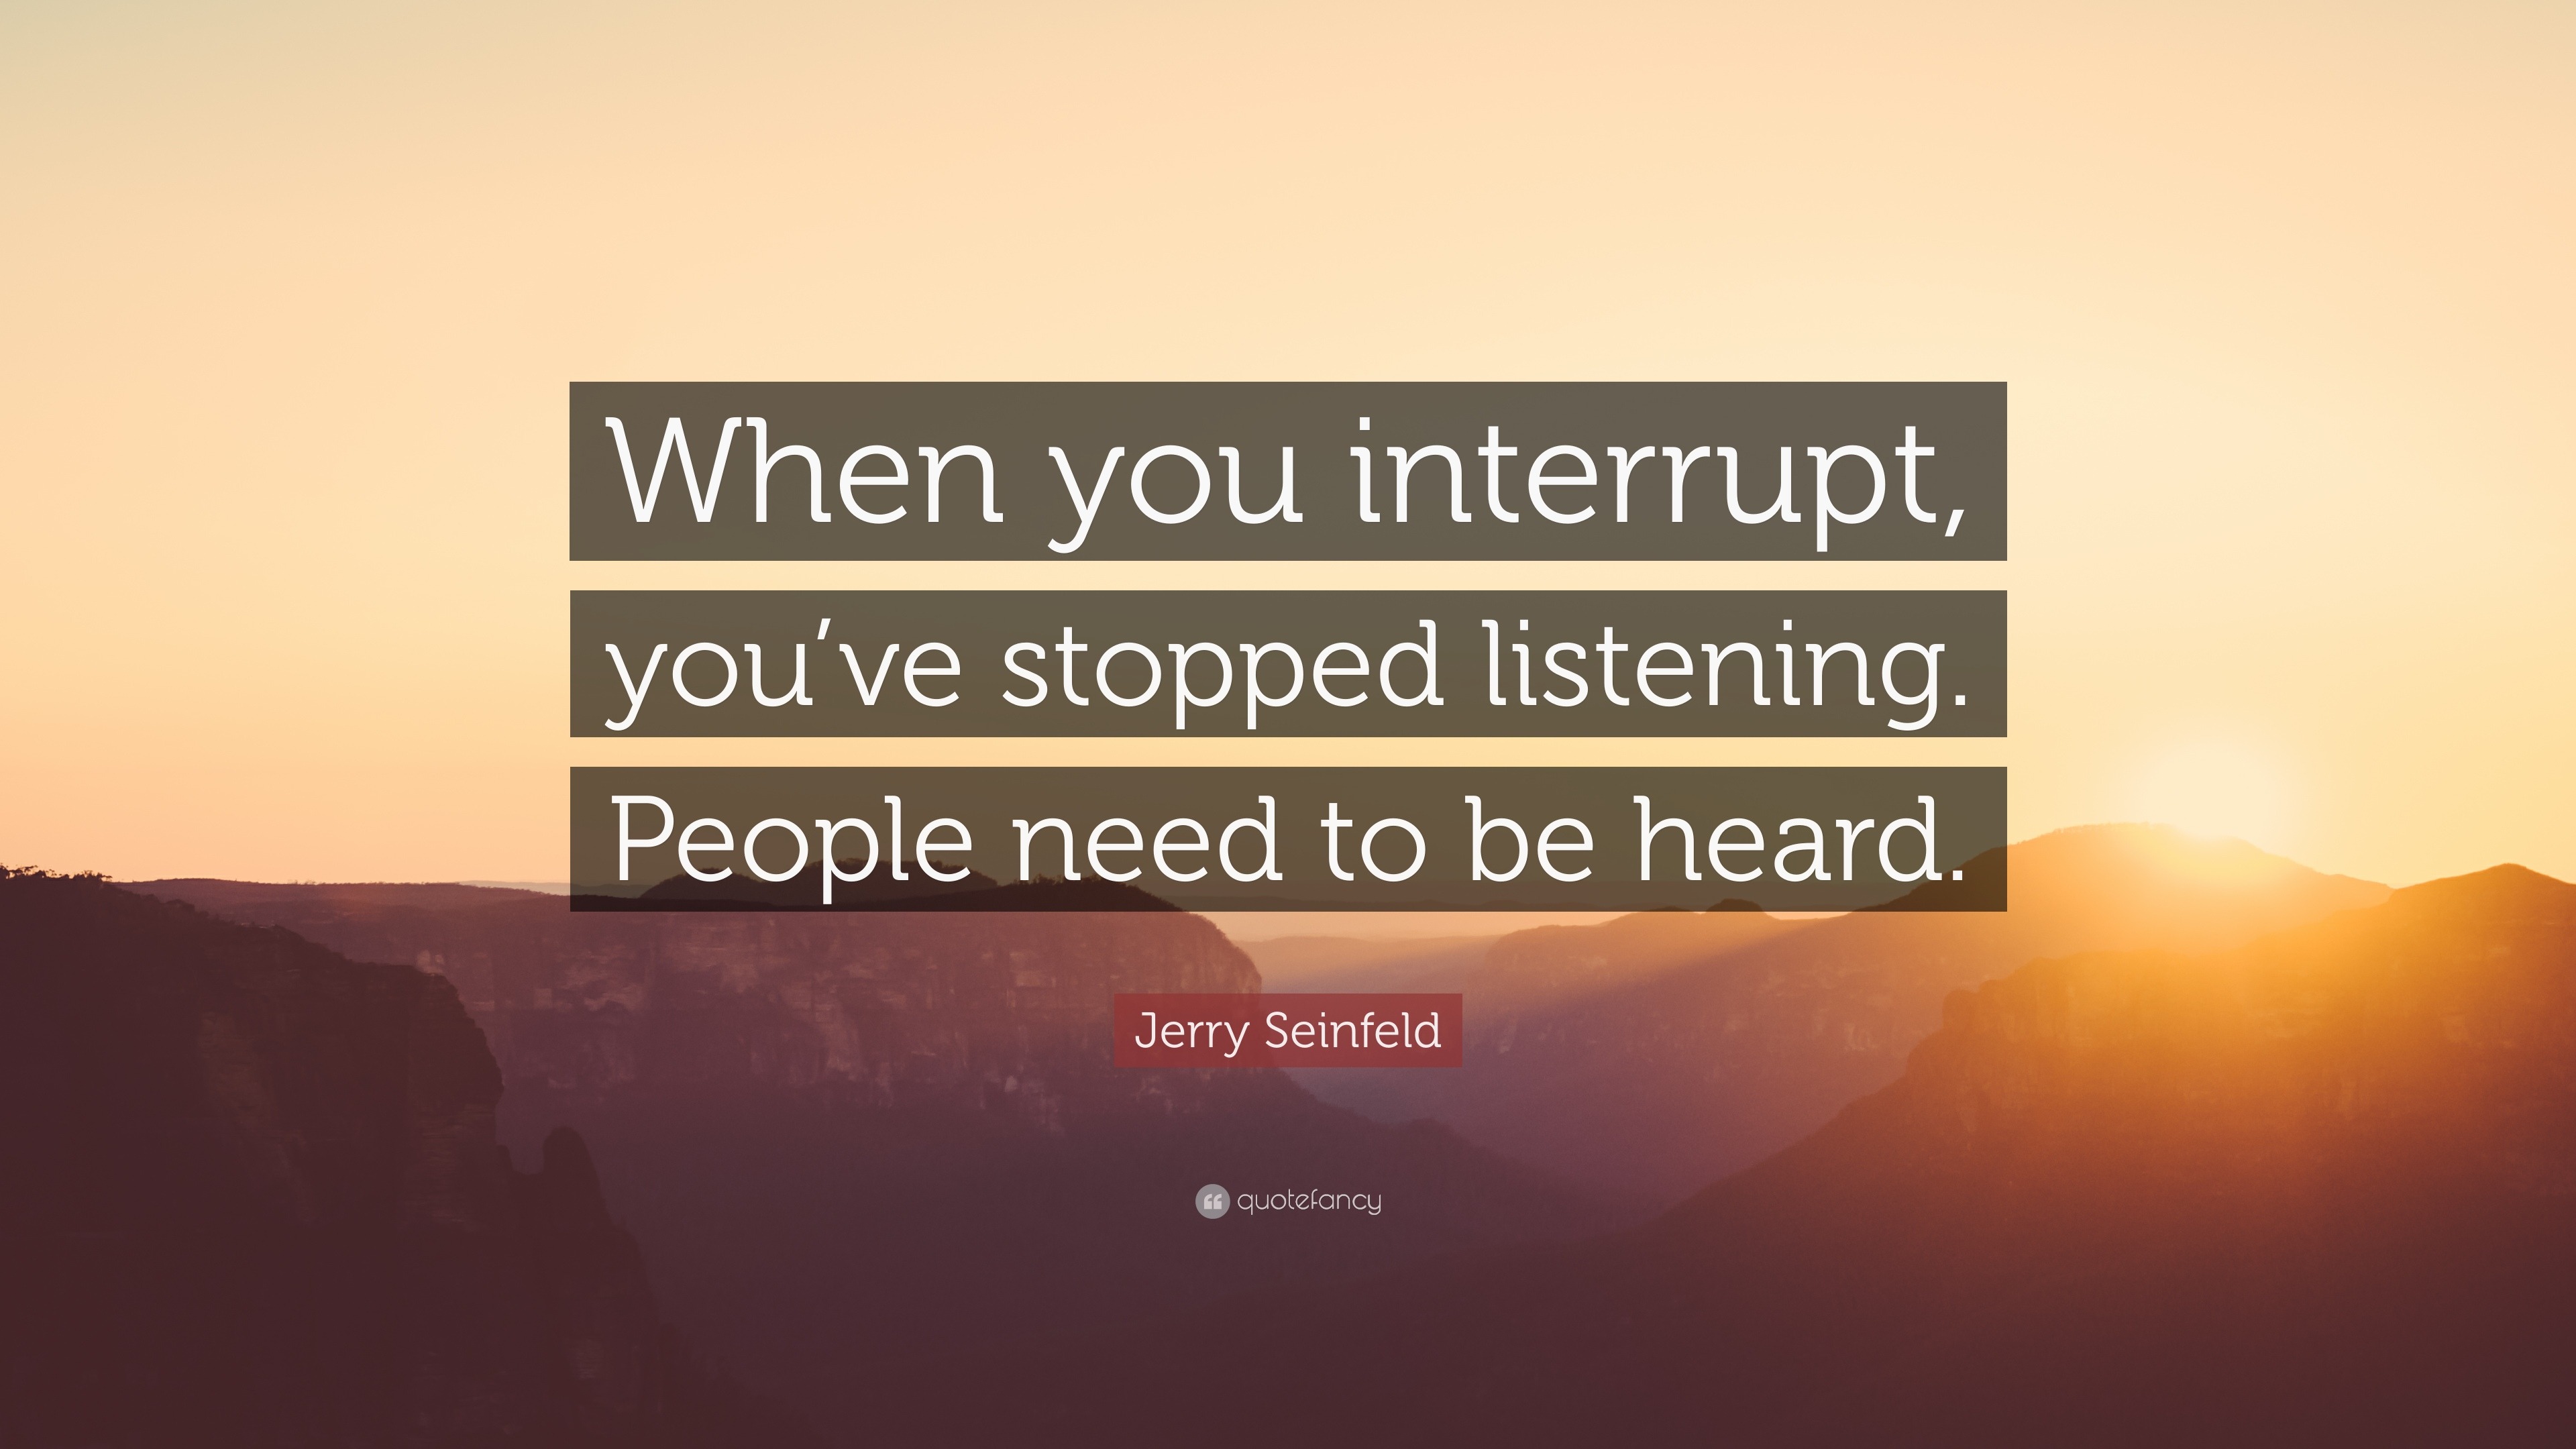 Jerry Seinfeld Quote: “When you interrupt, you’ve stopped listening ...